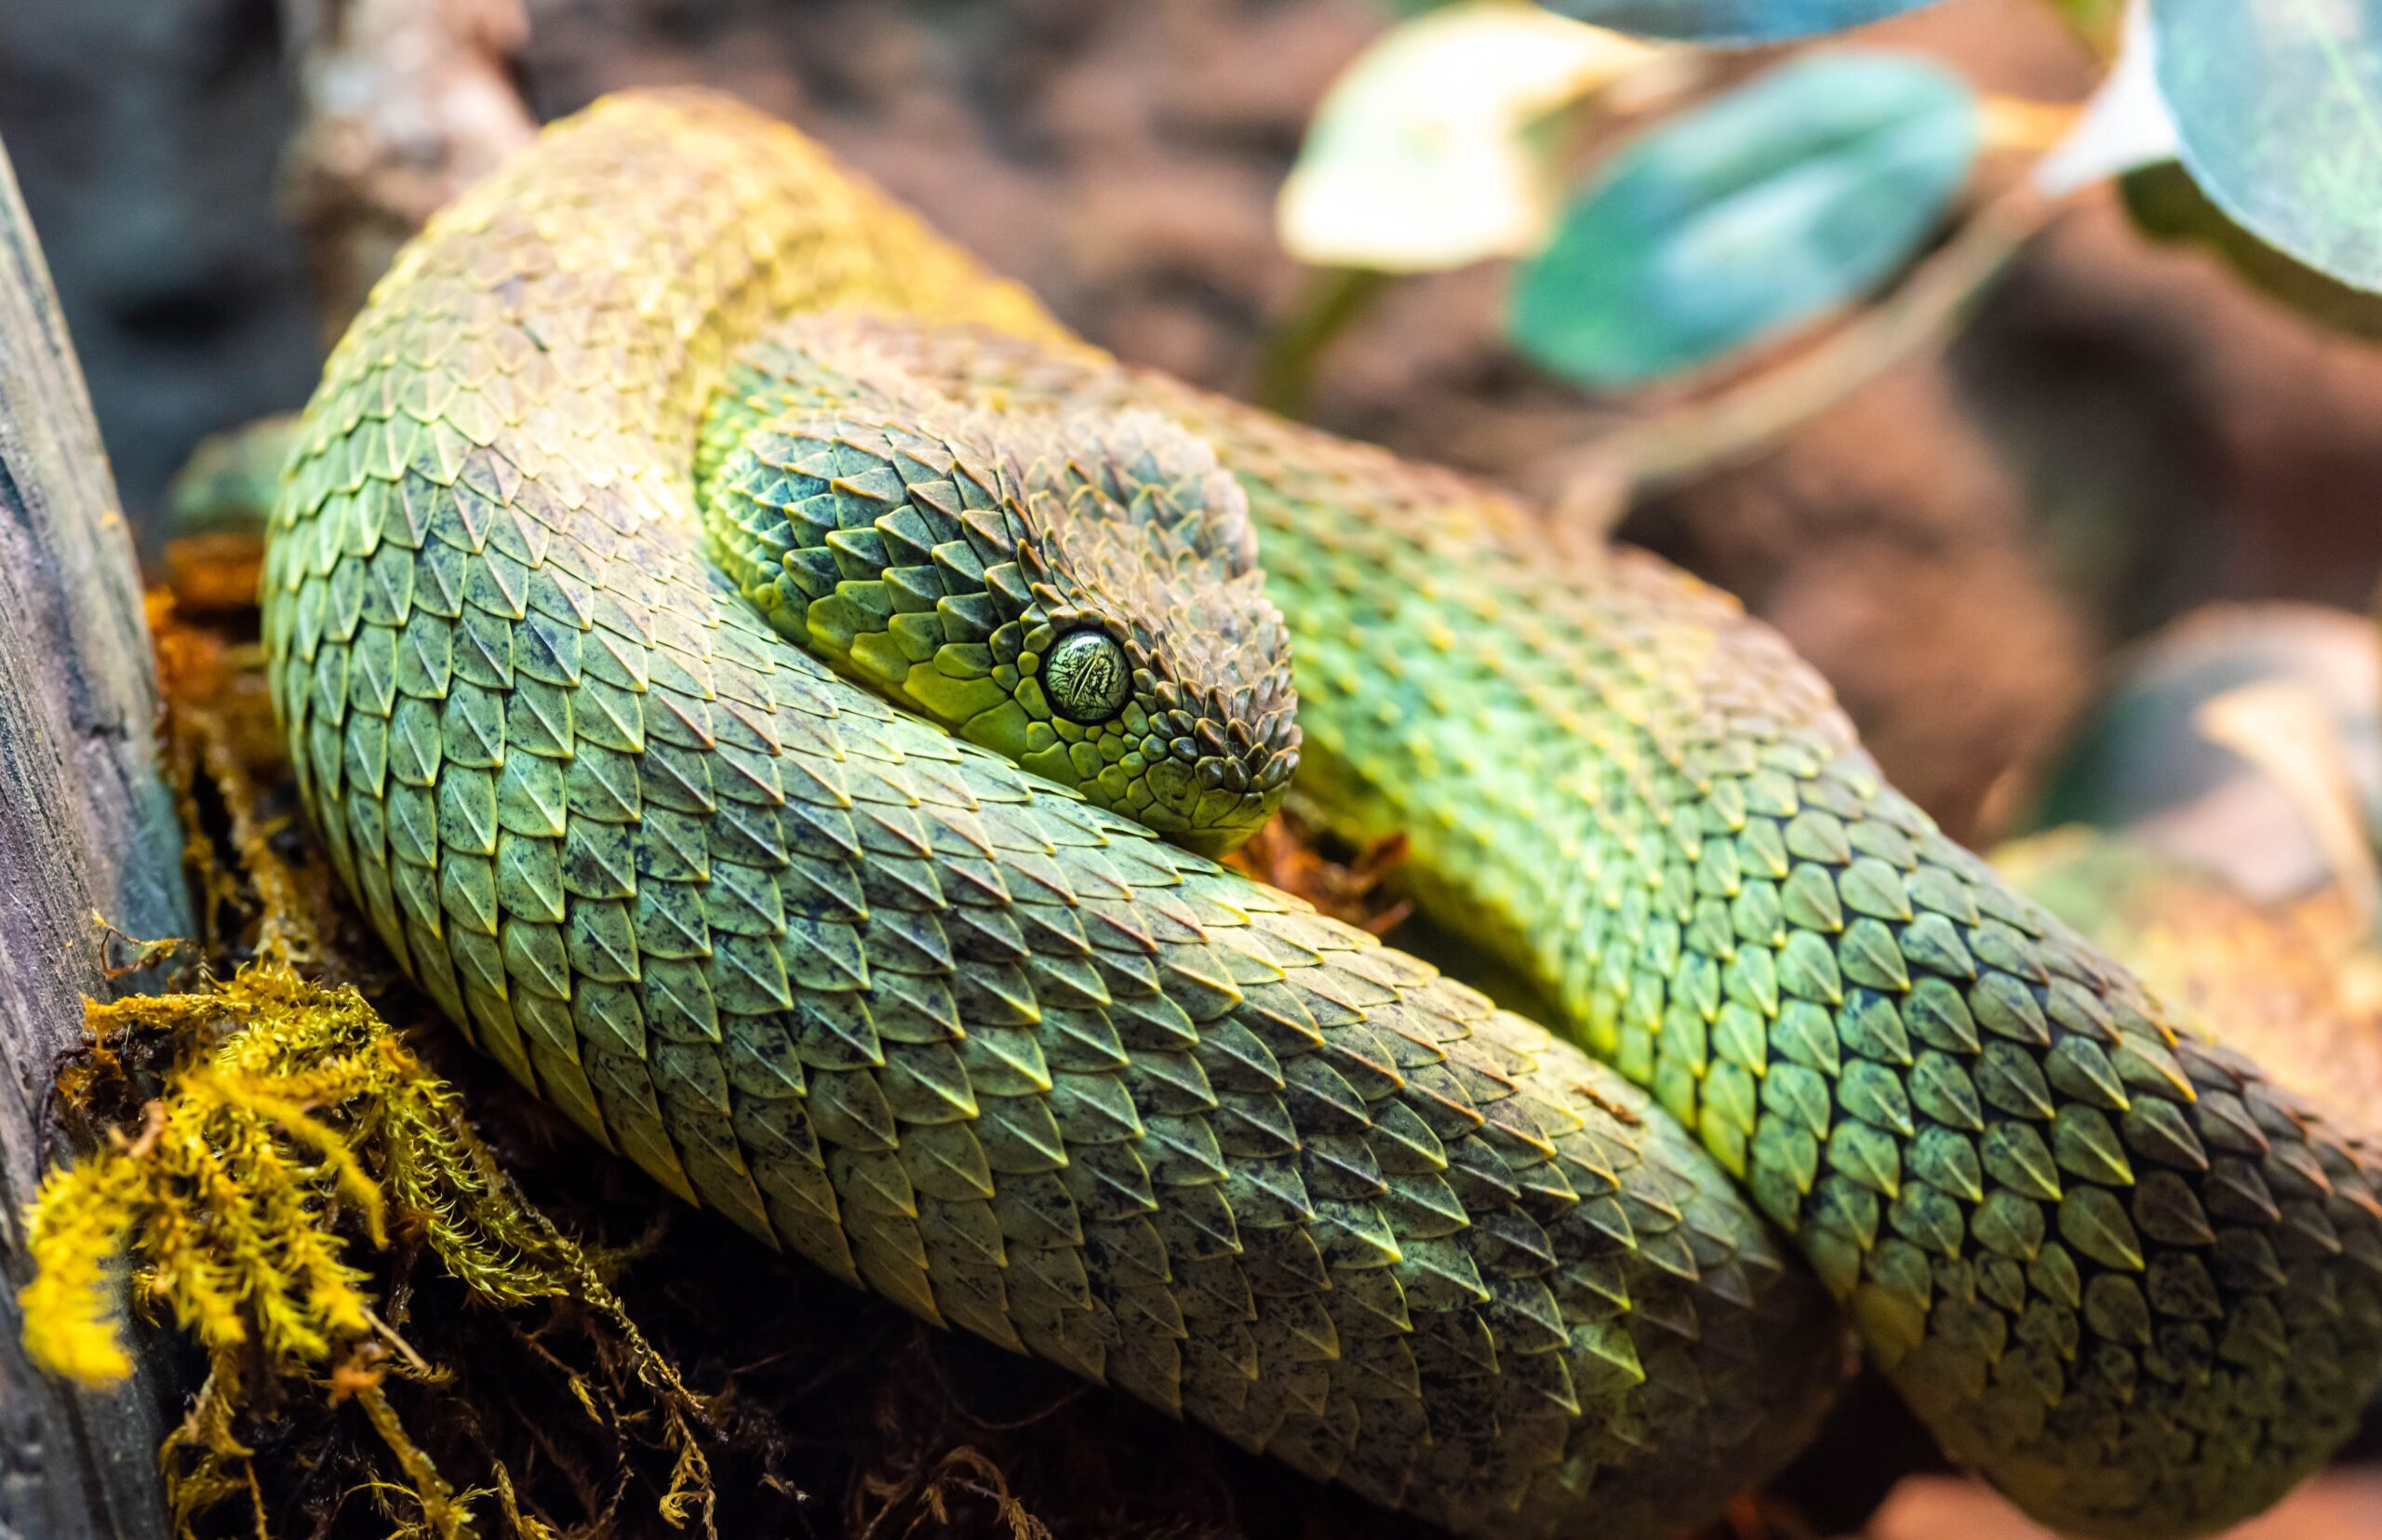 Green Bush Viper - Facts, Diet, Habitat & Pictures on